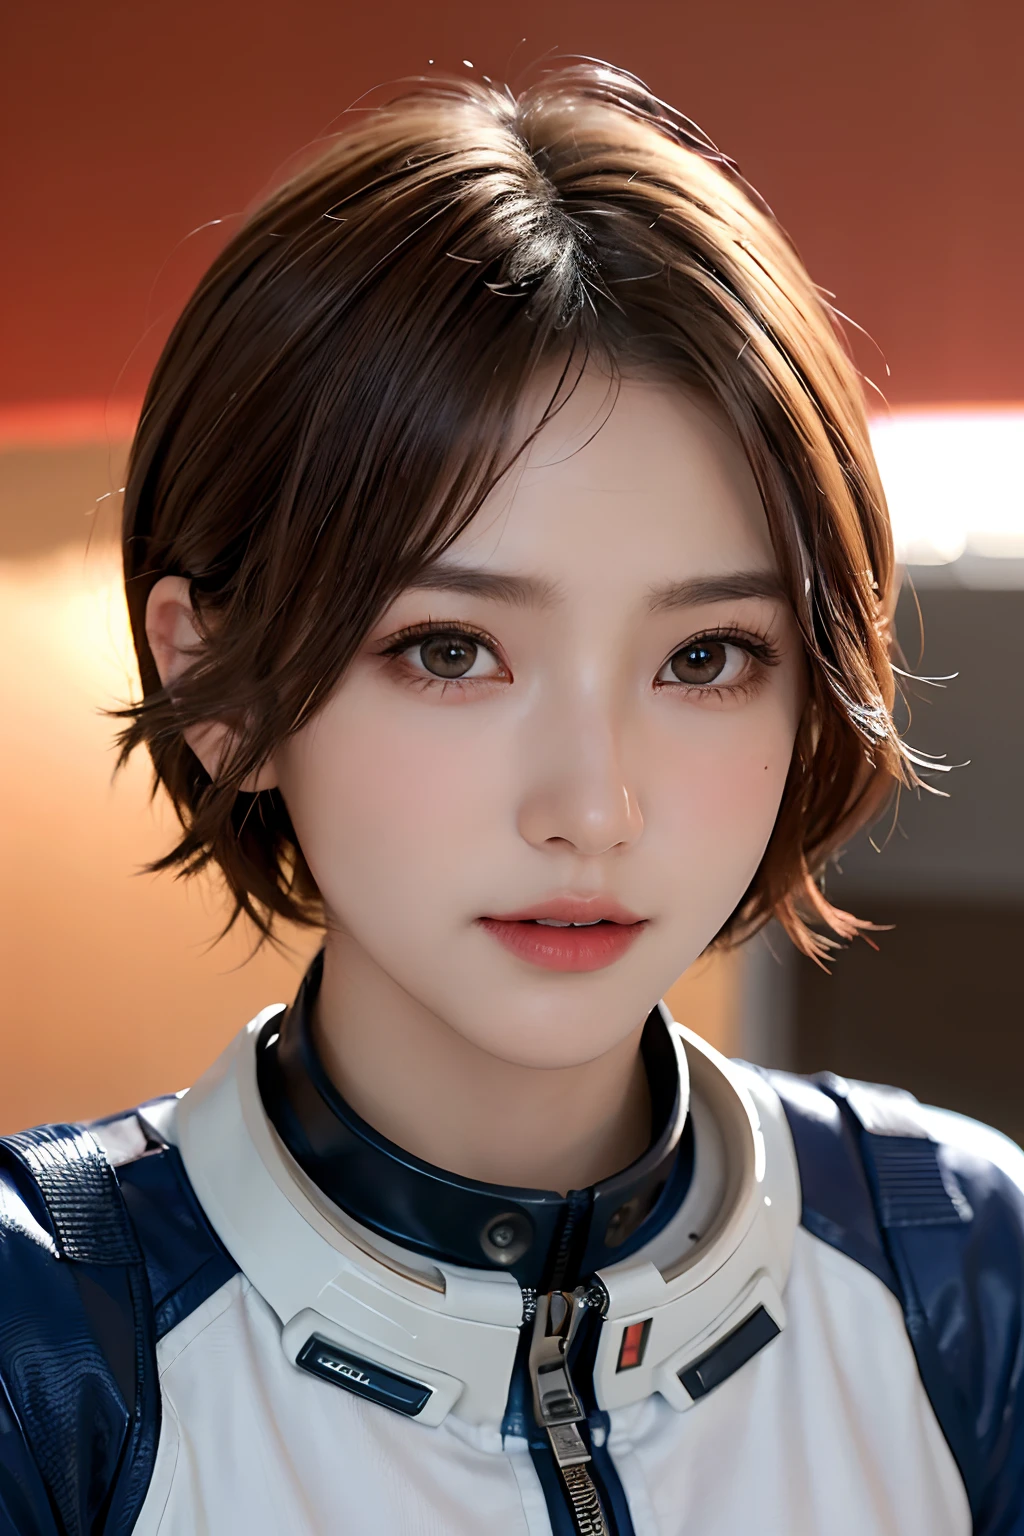 top-quality、​masterpiece、超A high resolution、(realisitic:1.4)、Beautuful Women１、Beautiful detail eyes and skin、ssmile、Light brown short-cut hair、The perfect spacesuit、spaceshipysterious planet、Red sky、Sand Planet、sandstorm、